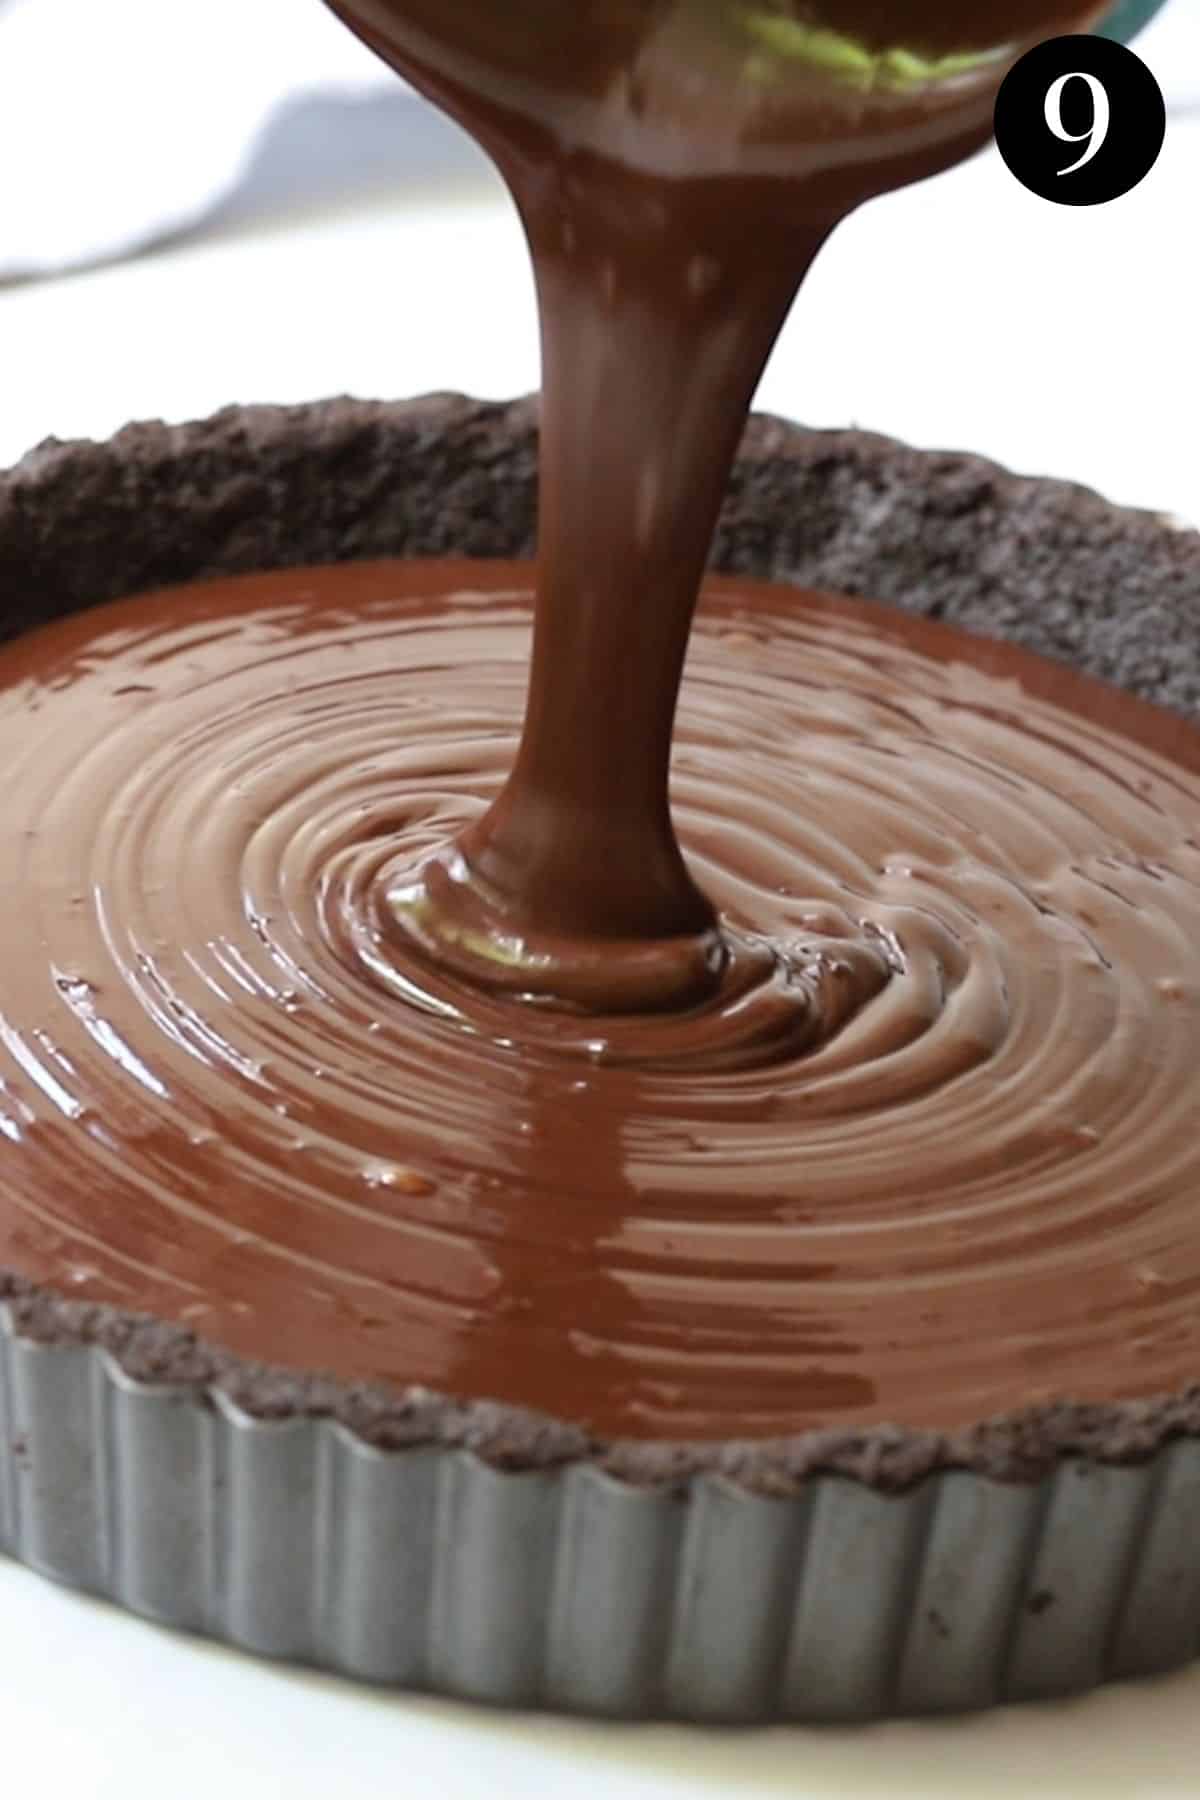 chocolate ganache being poured into a biscuit base.